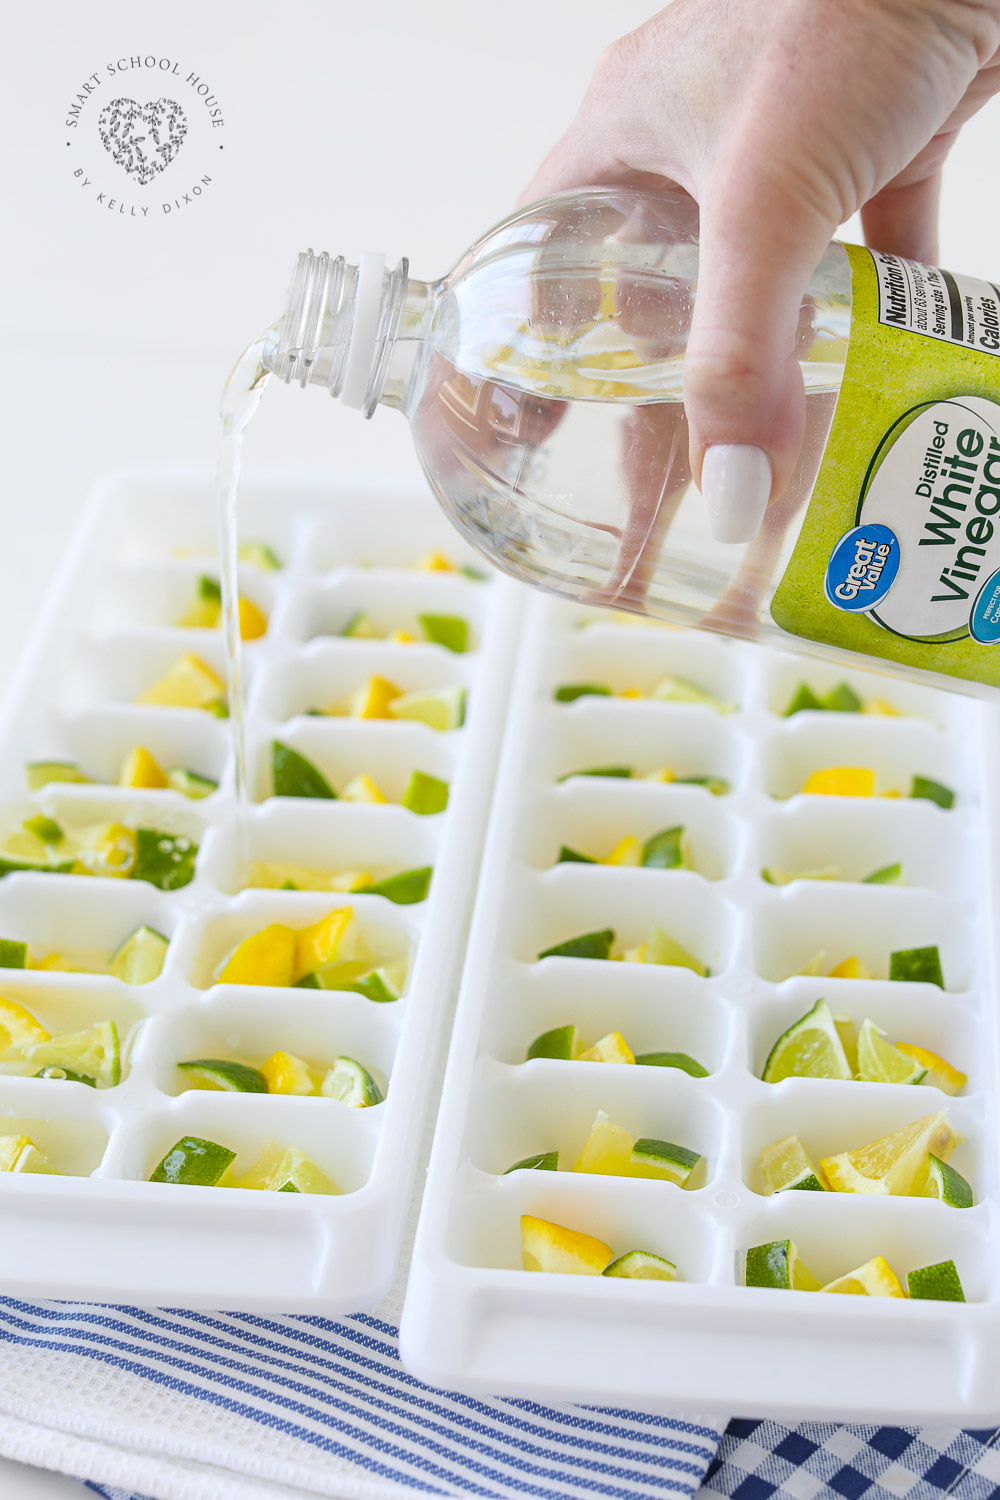 Vinegar and lemons and limes for garbage disposal